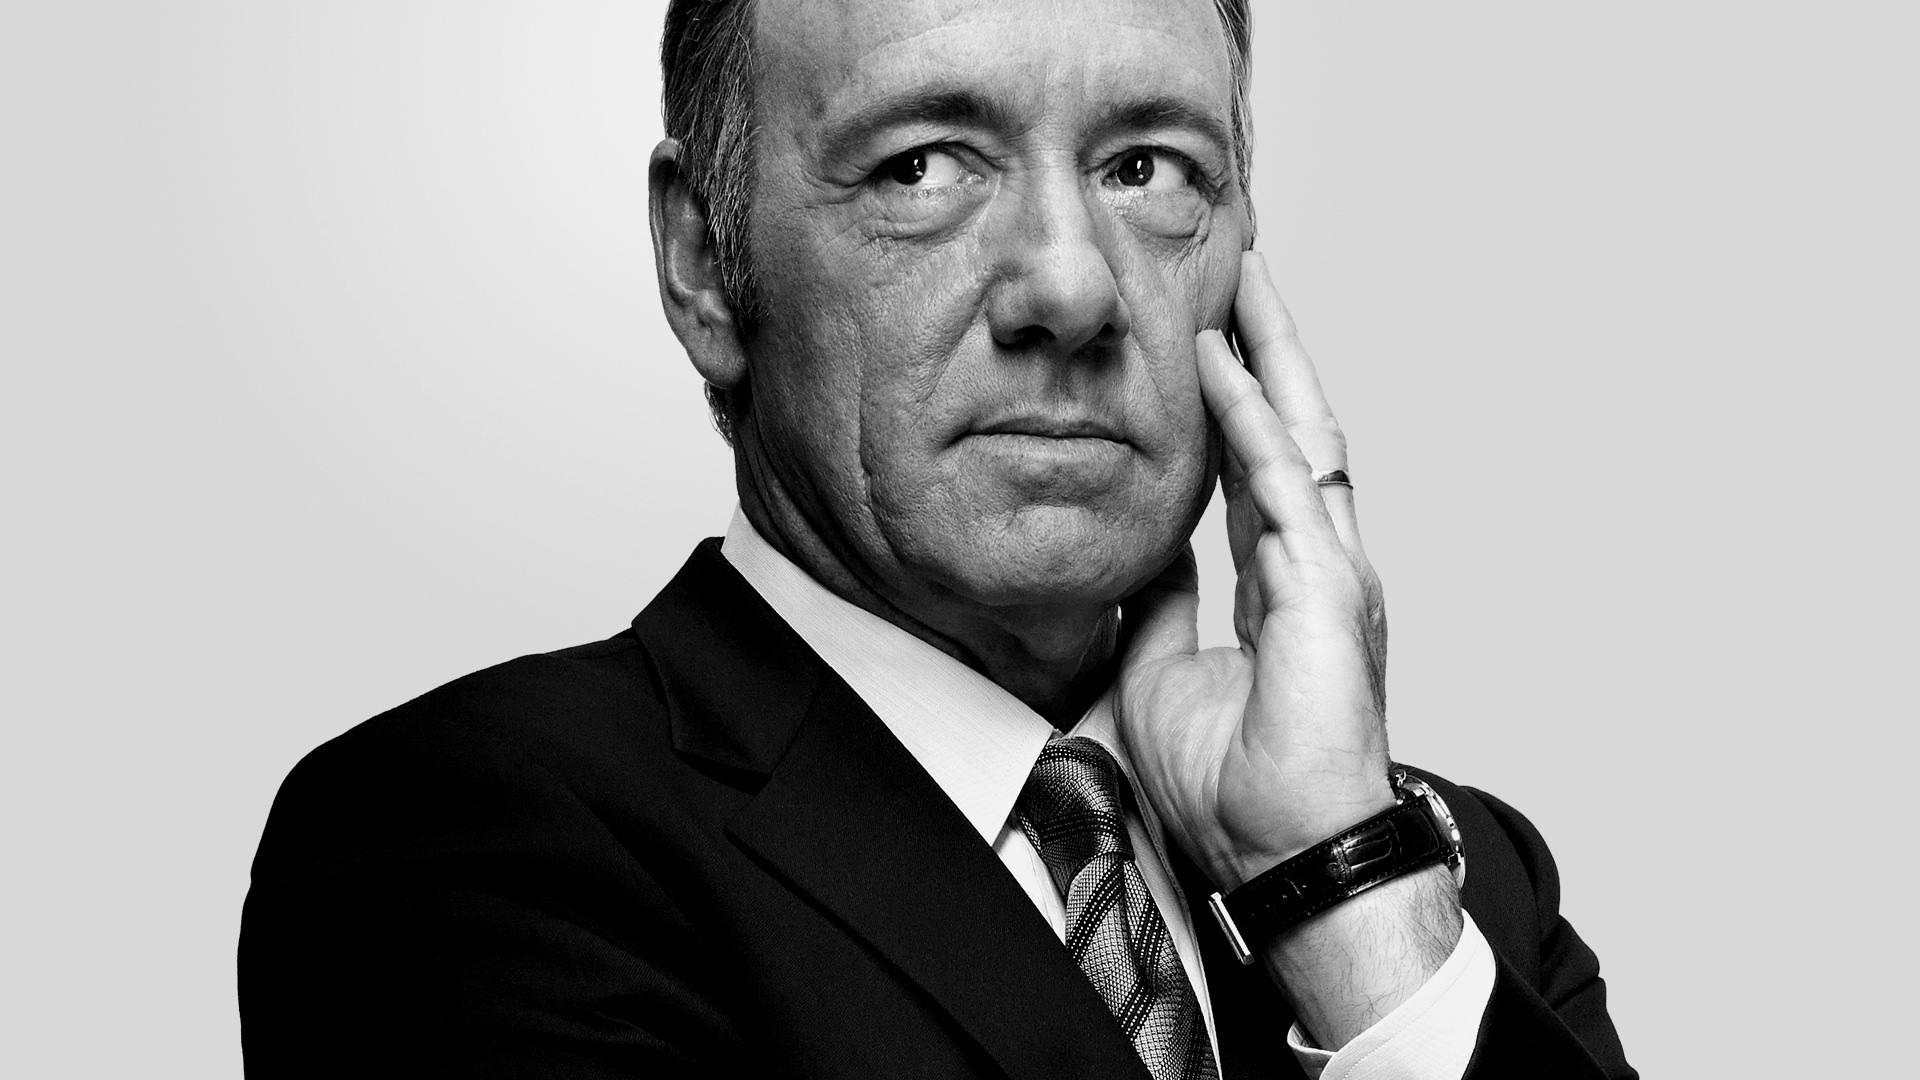 Kevin Spacey 1920 X 1080 Wallpaper